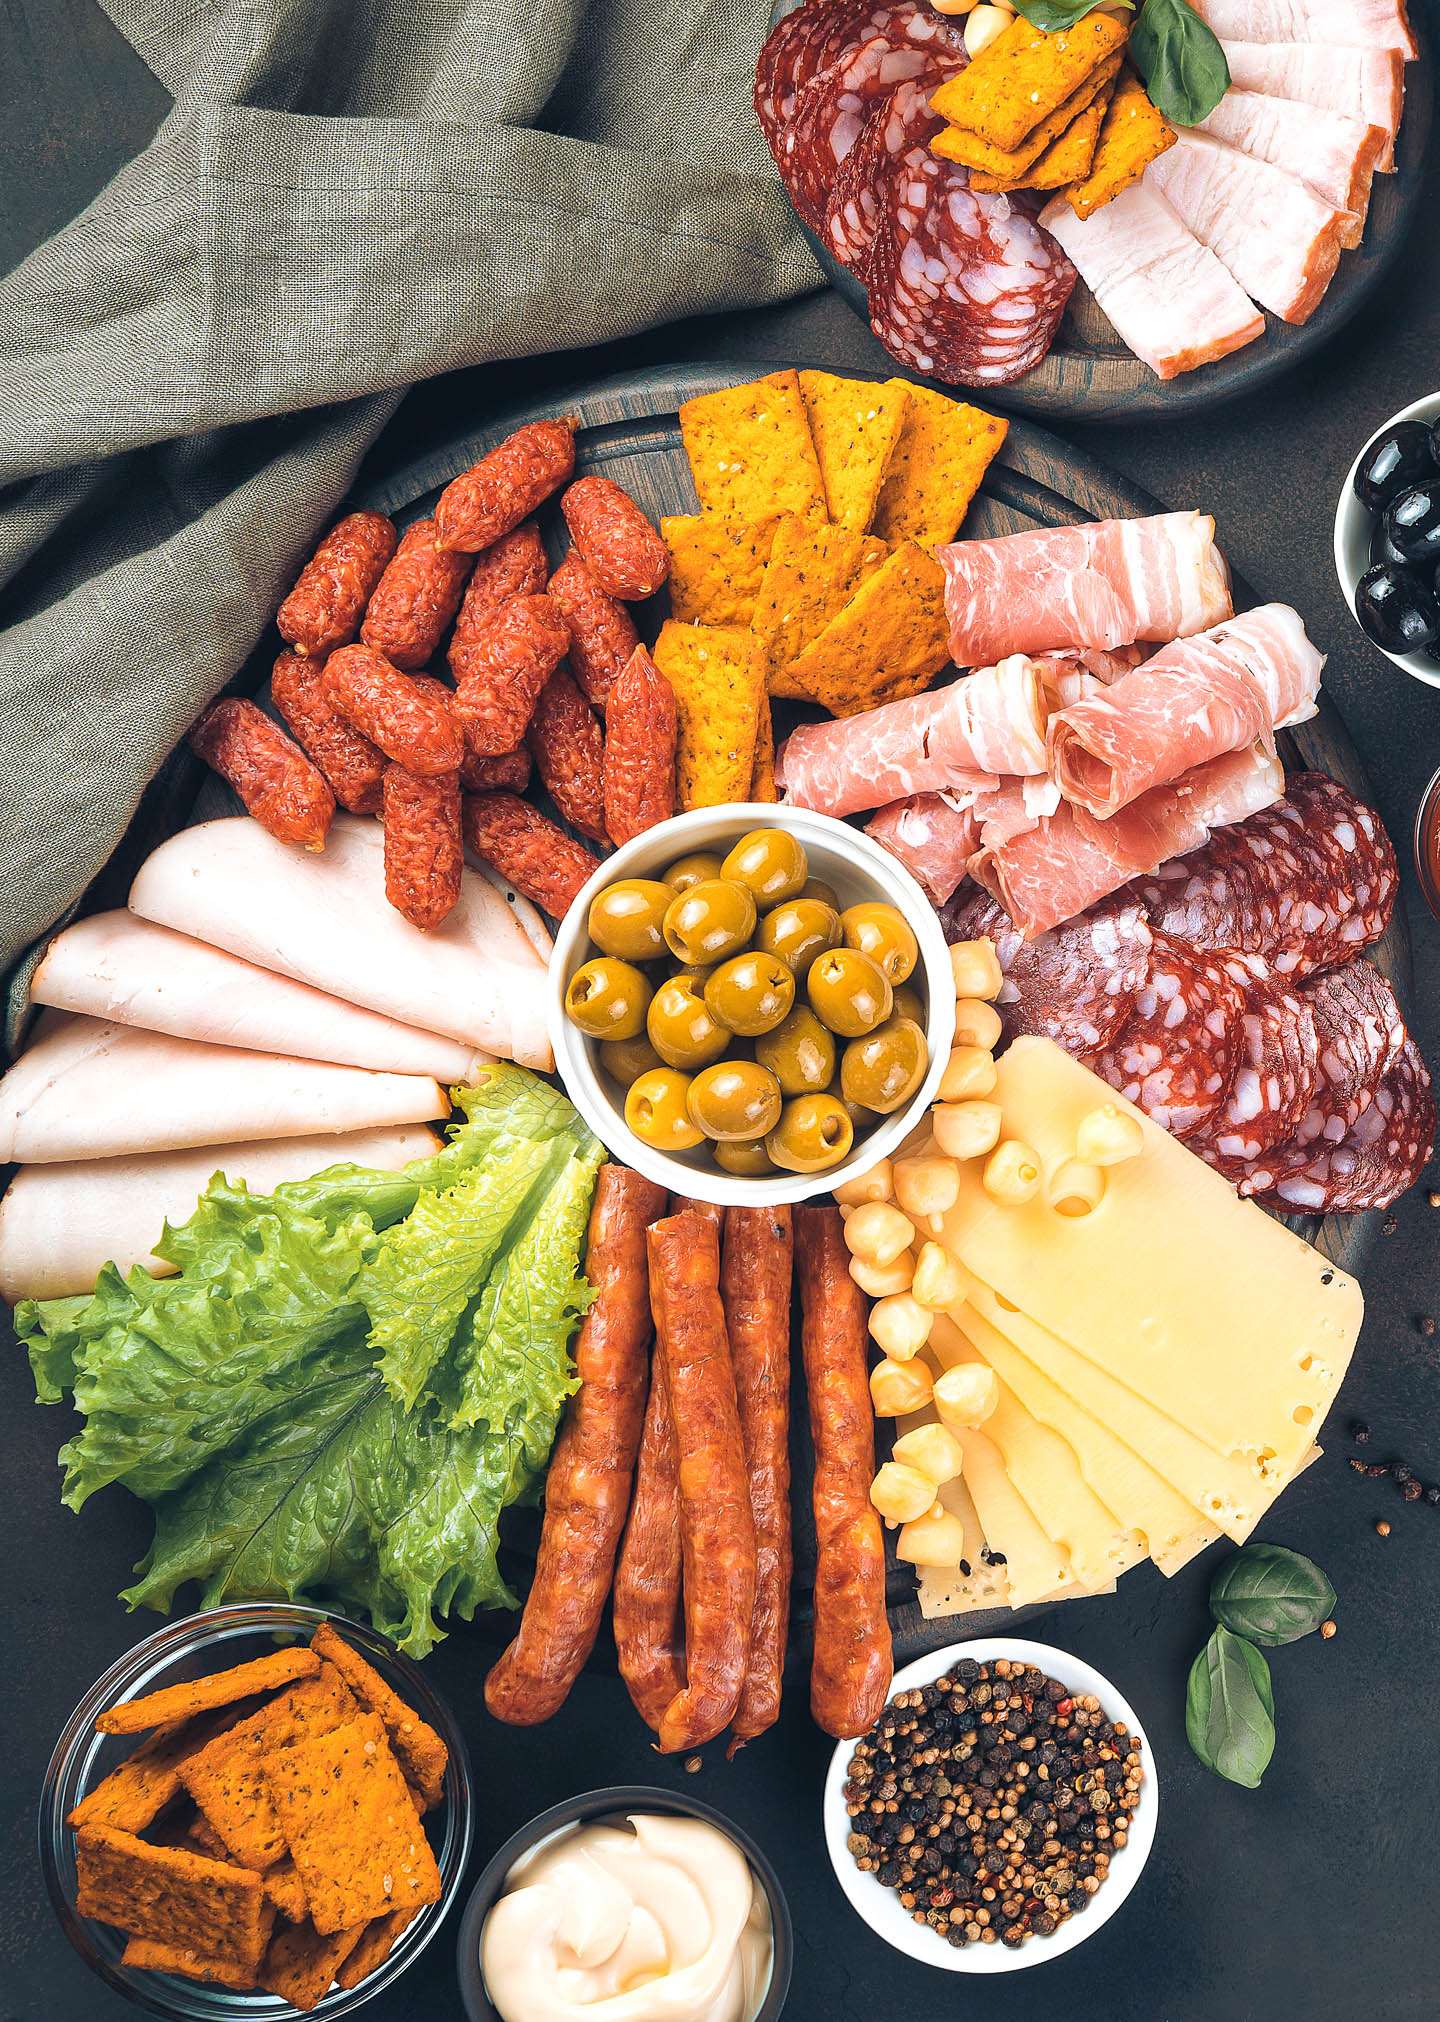 A round charcuterie board with a bowl of olives in the middle and various meats, cheeses and crackers spread out on the board